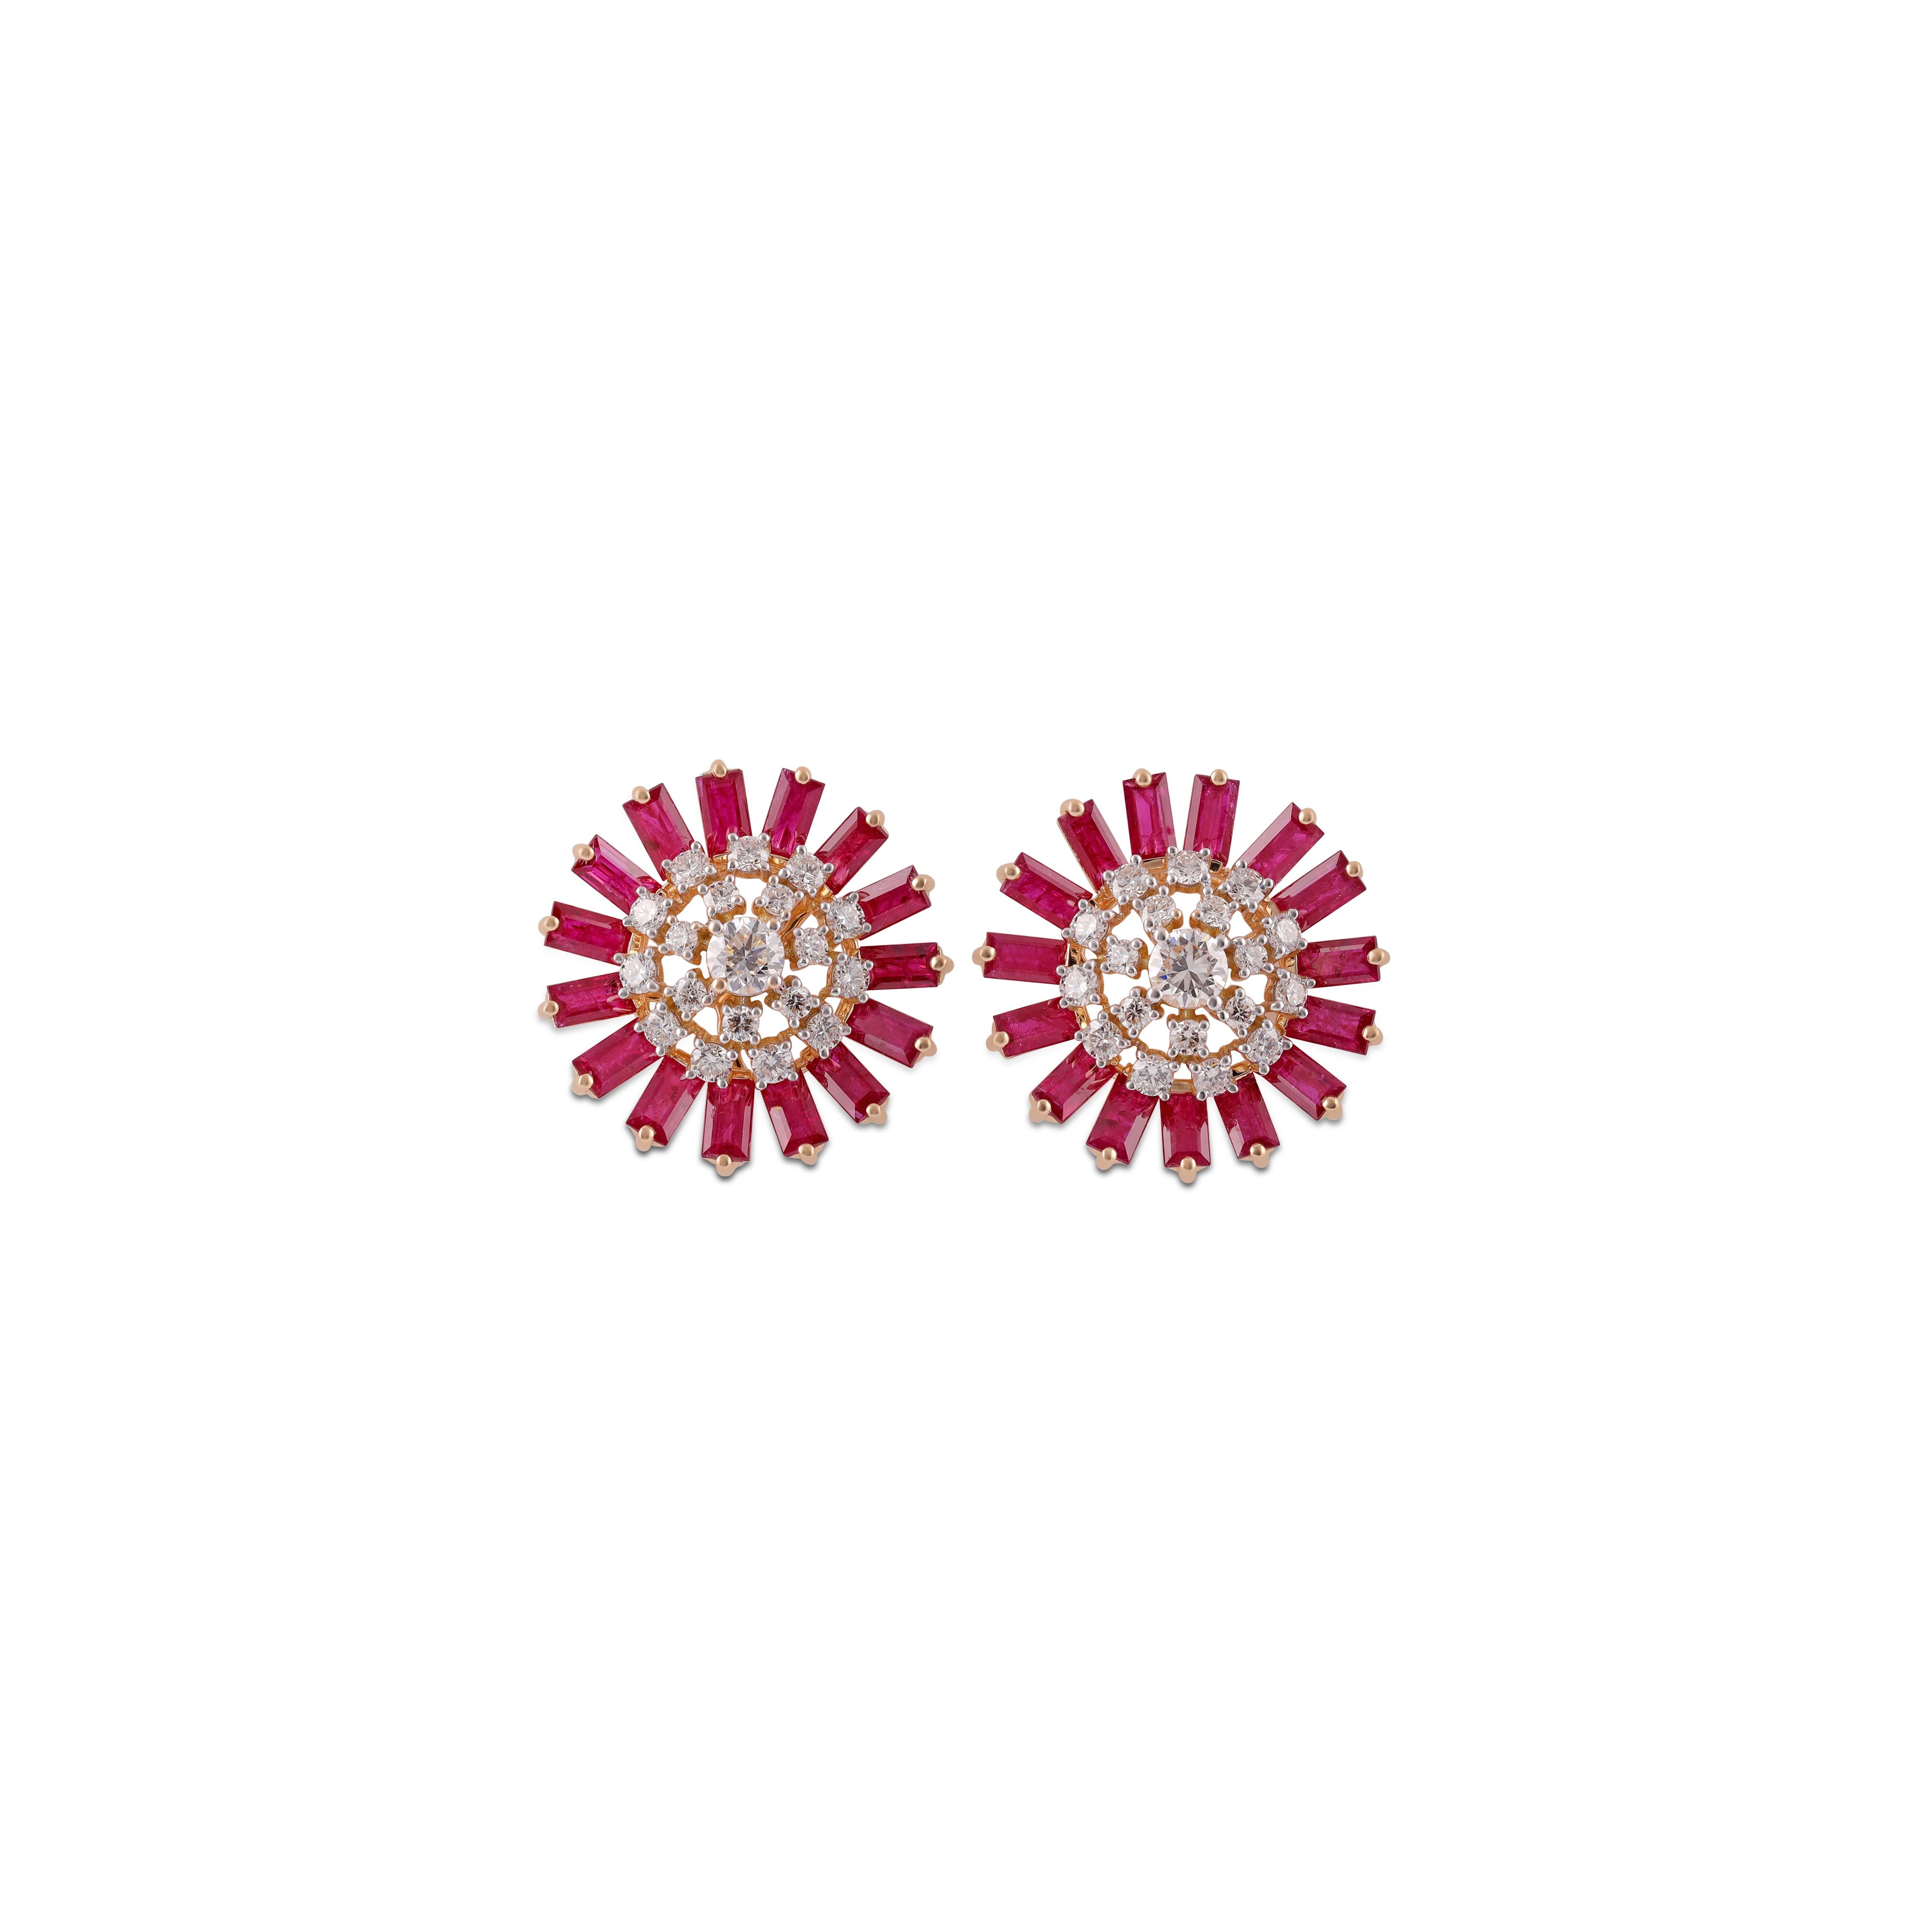 Its an elegant & modern style Ruby  & diamond earrings studded in 18k Yellow gold features 30 pieces of Ruby weight 3.80 carat with 38 pieces of diamonds weight 1.27 carat, this entire earring pair is made of 18k Yellow gold weight 6.94 grams, these